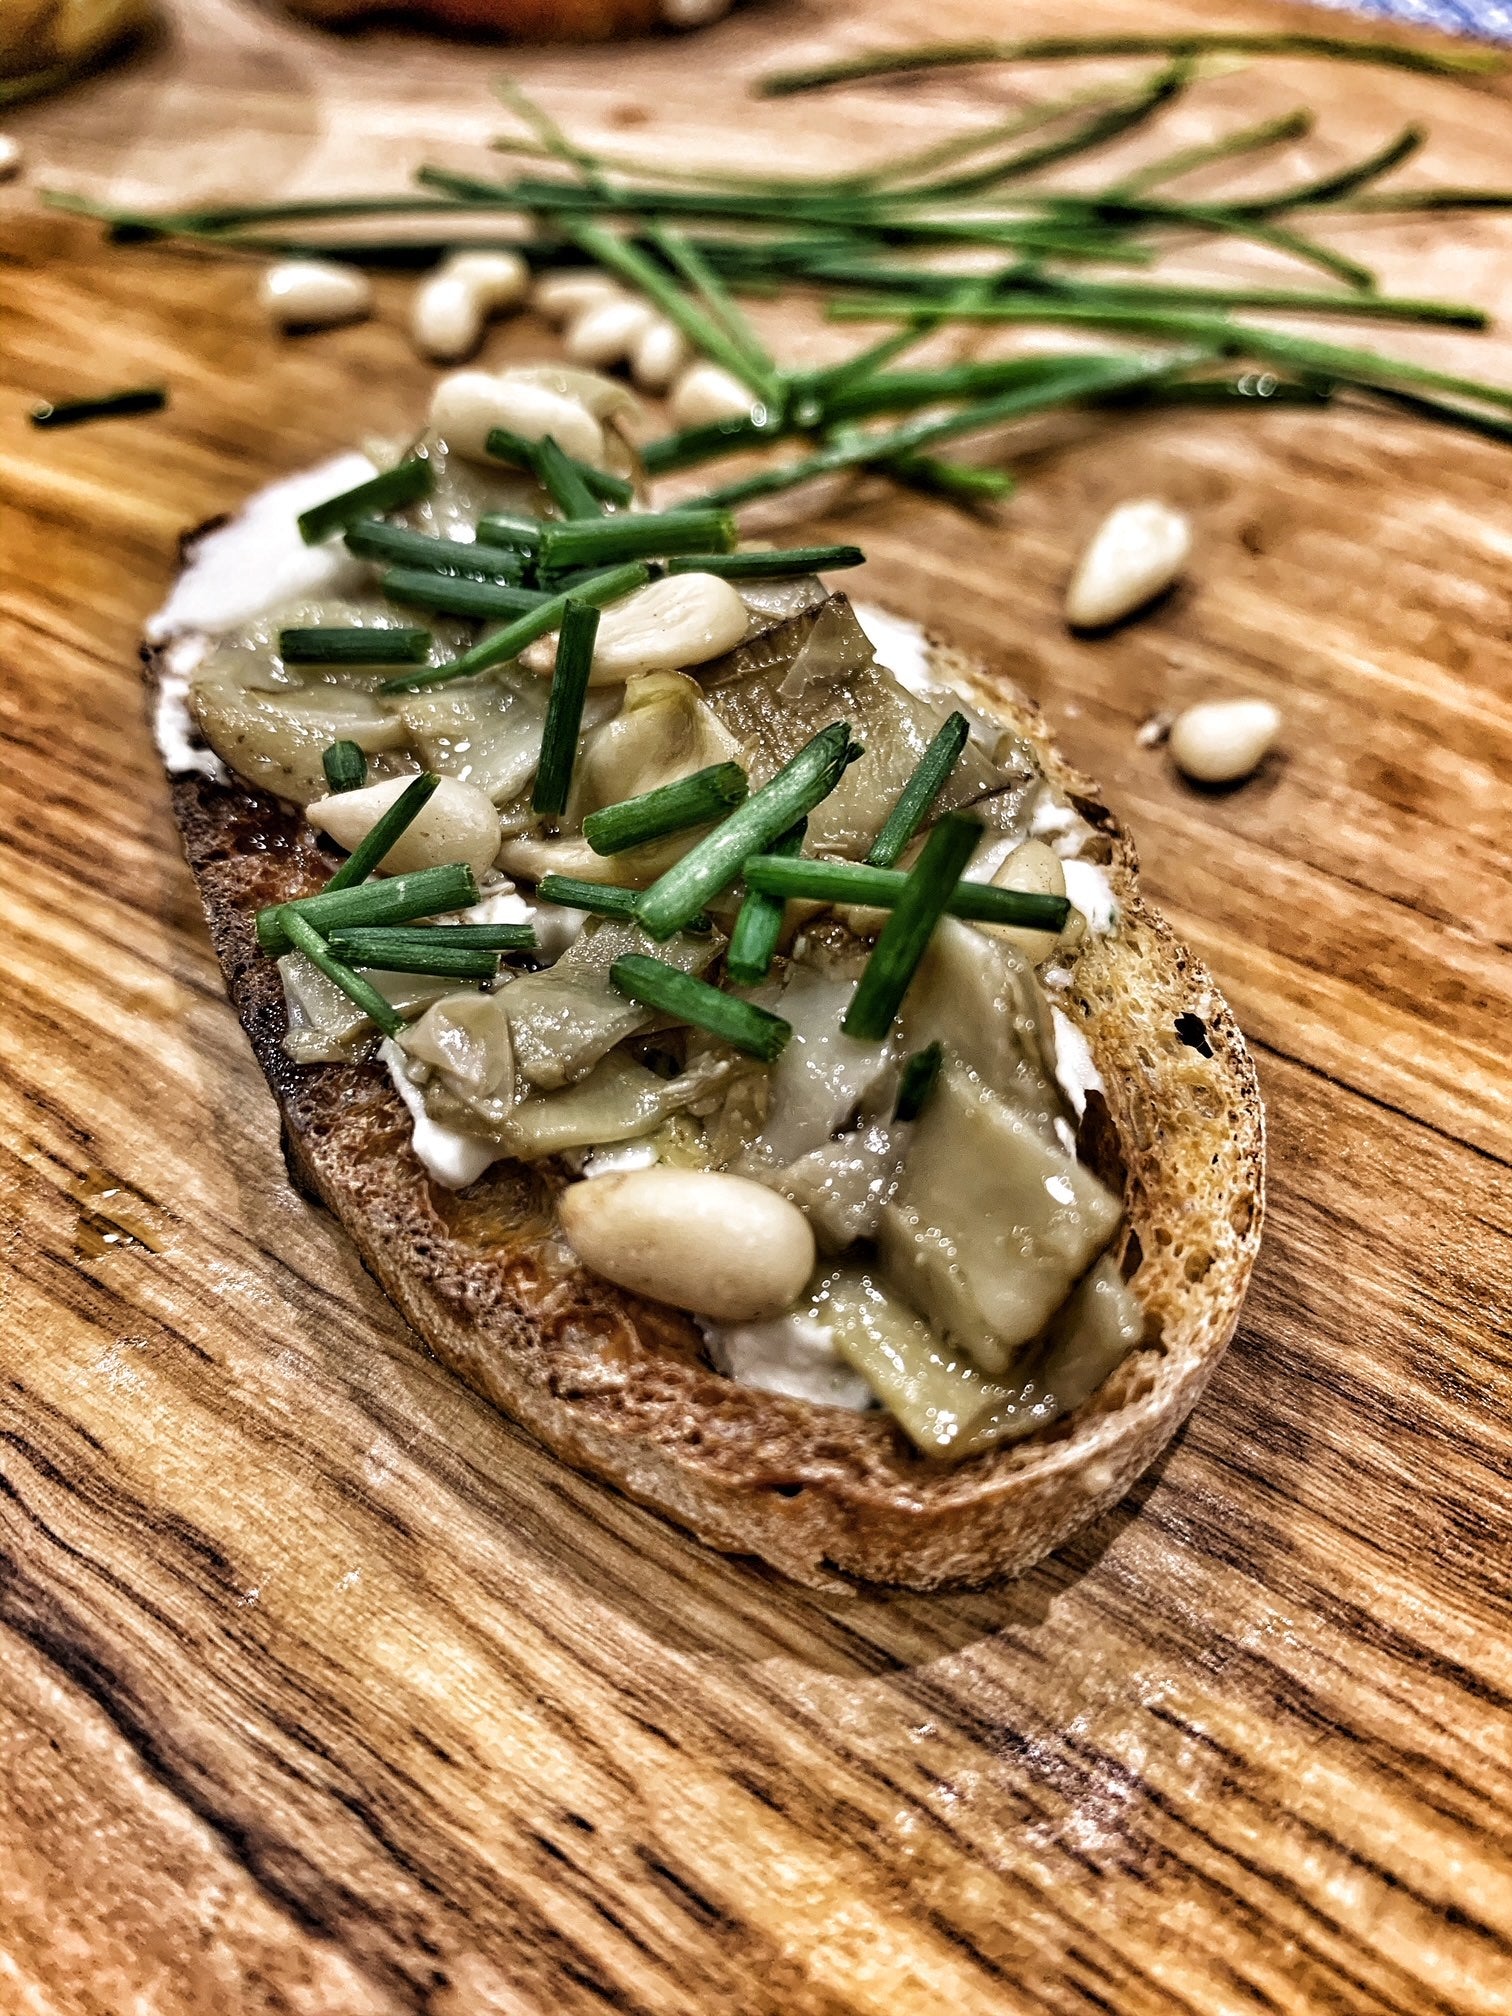 Artichoke Crostini with Cheese and Pine Nuts